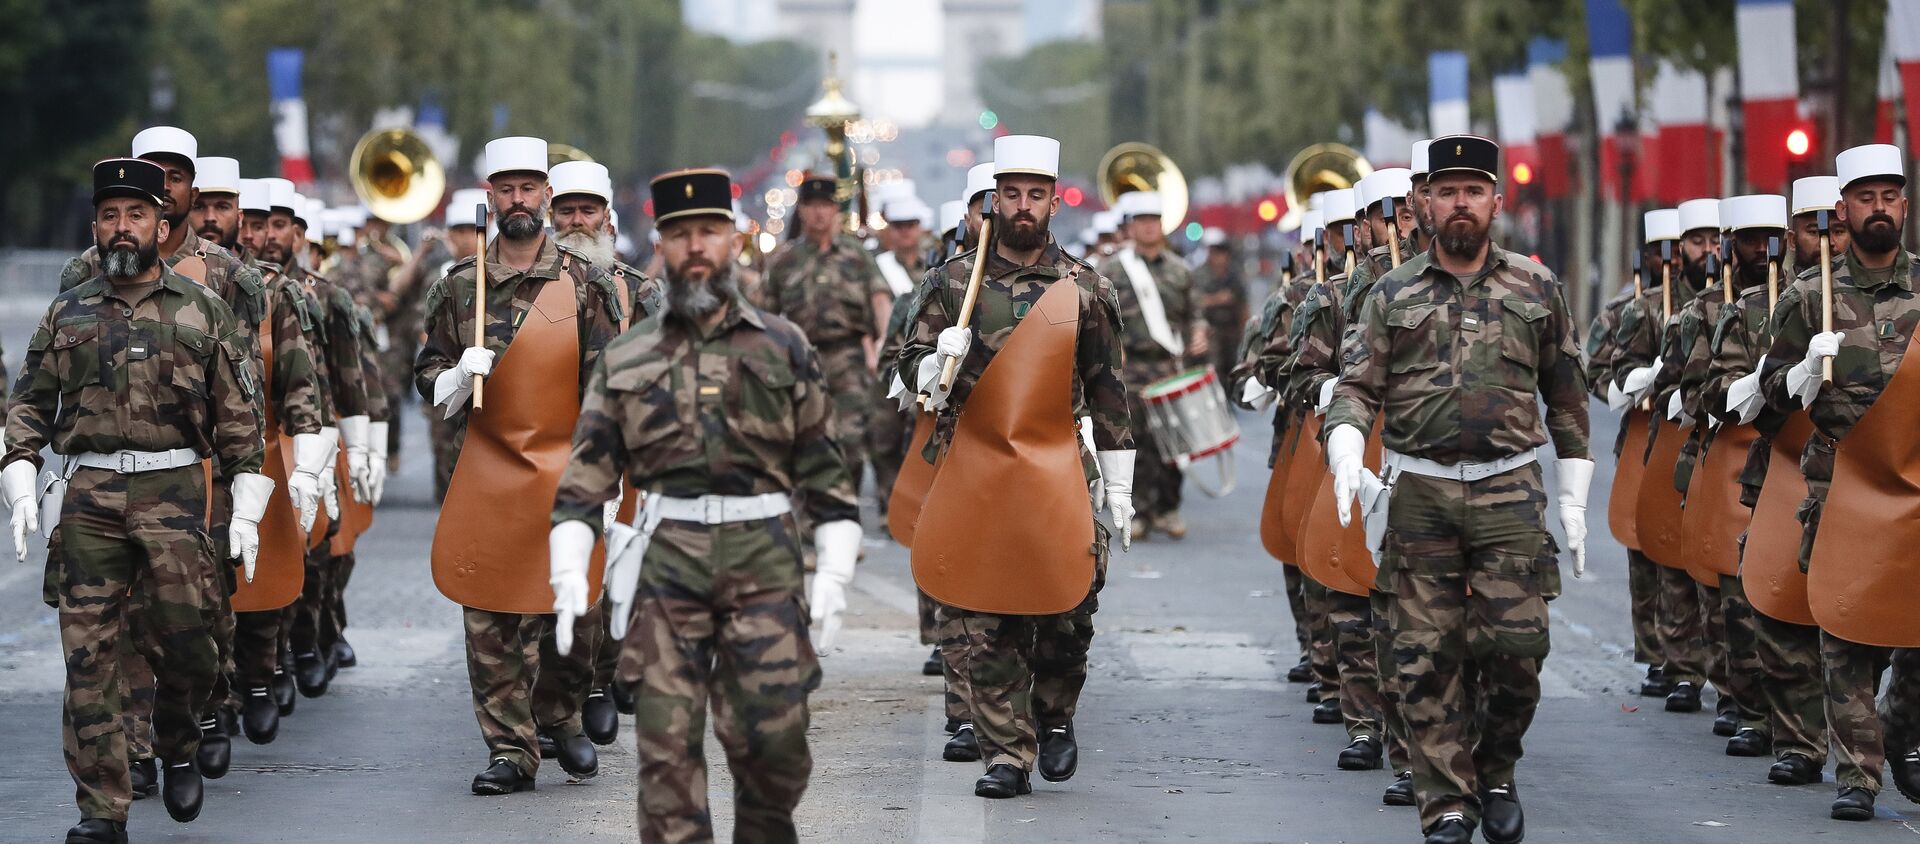 Soldiers of the French Foreign Legion parade on the Champs Elysees in Paris during a rehearsal for Bastille Day, 11 July 2018. - Sputnik International, 1920, 30.04.2021